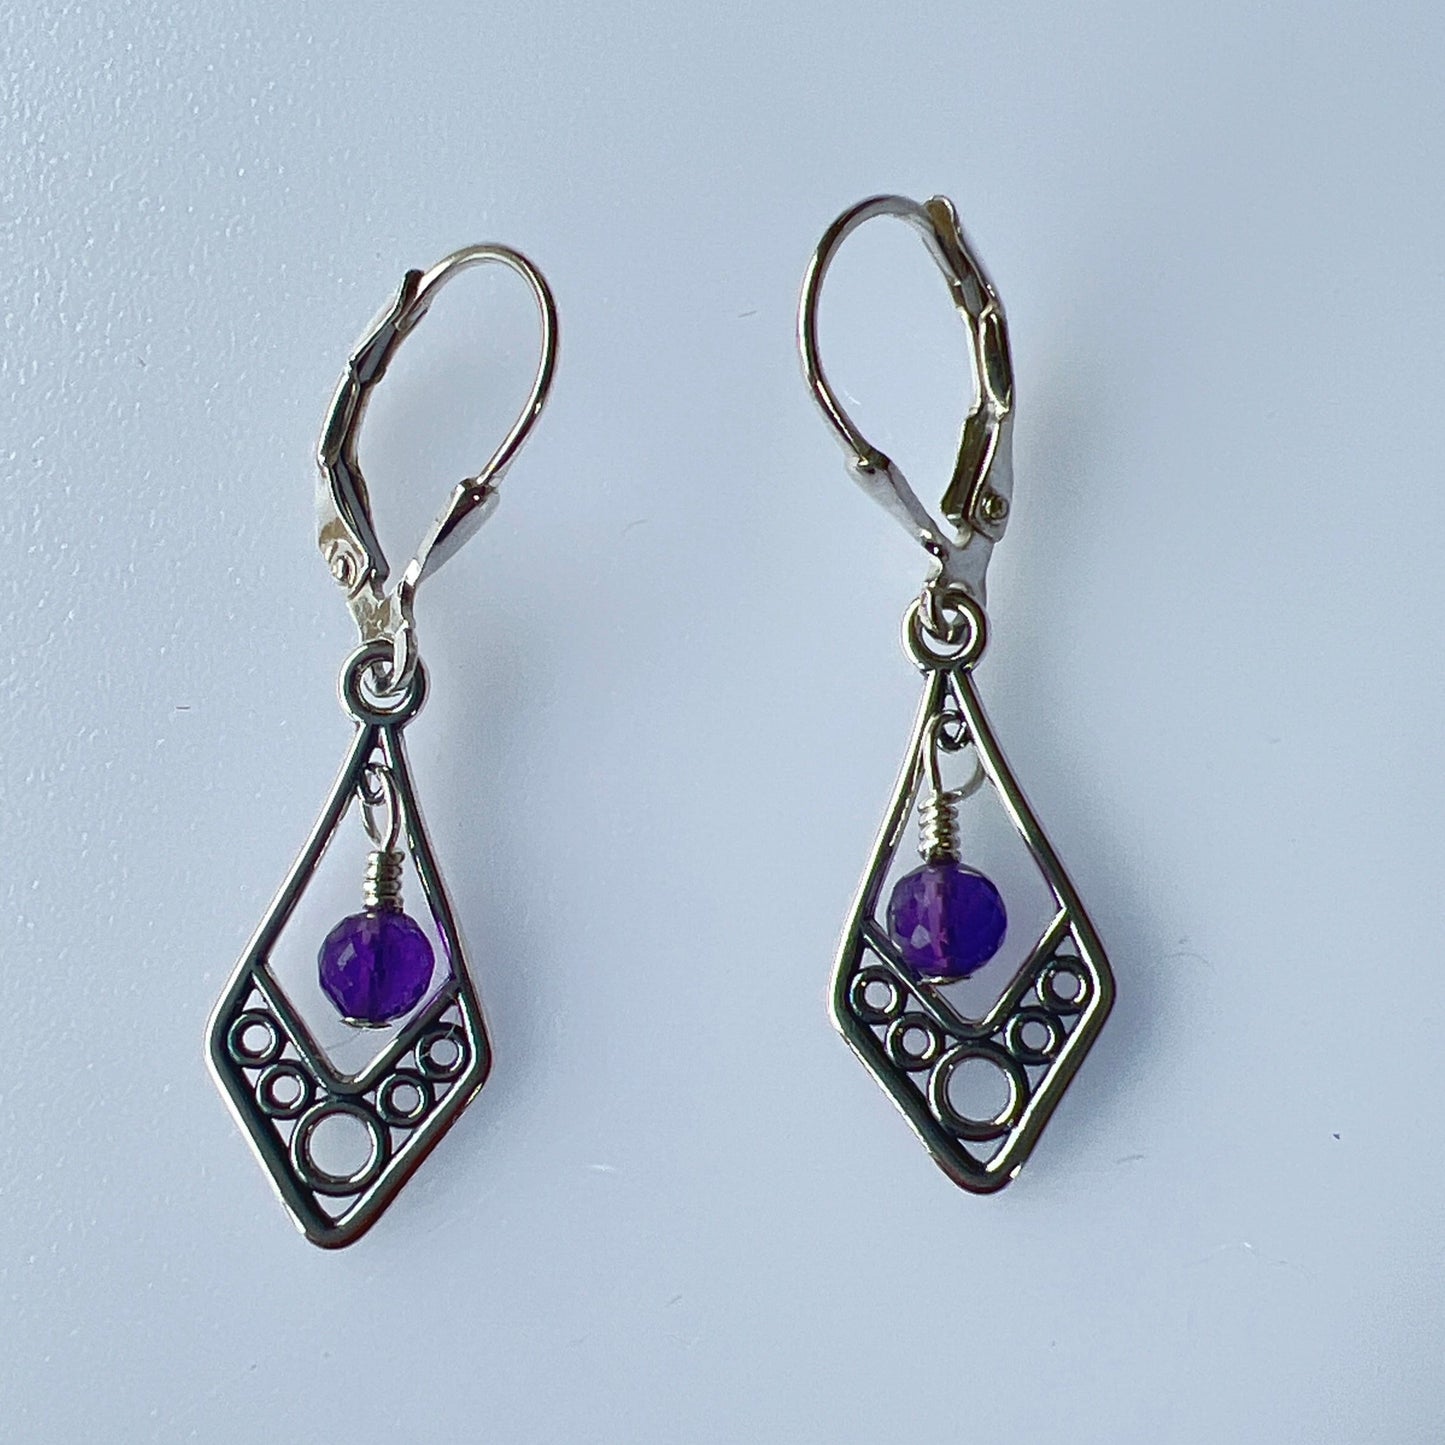 Sterrling Silver Filigree with amethyst dangled 